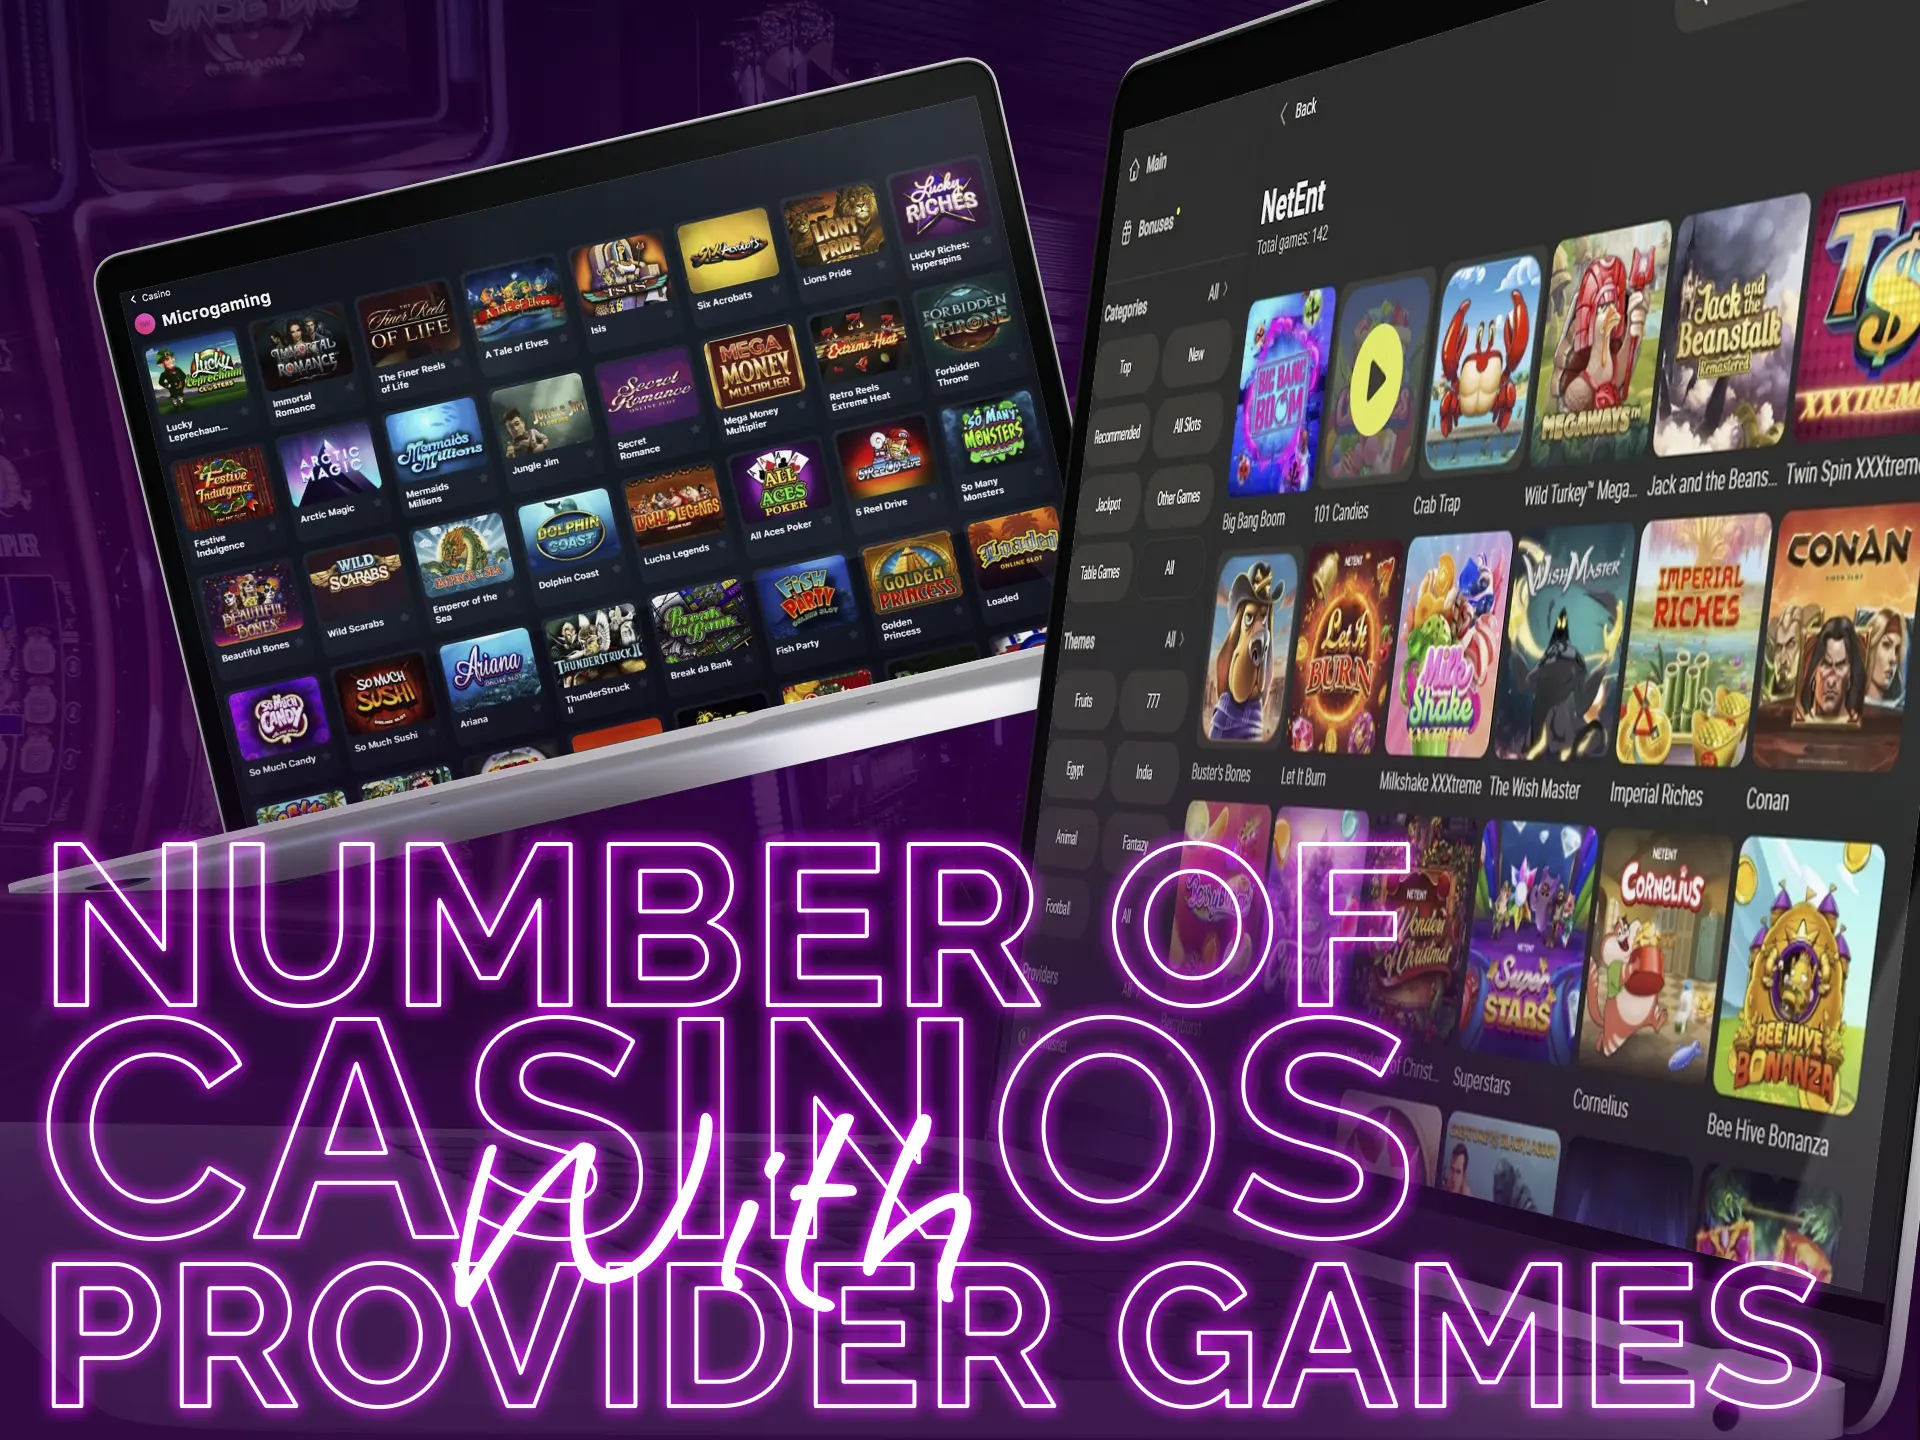 Games of each provider can be played in different casinos.